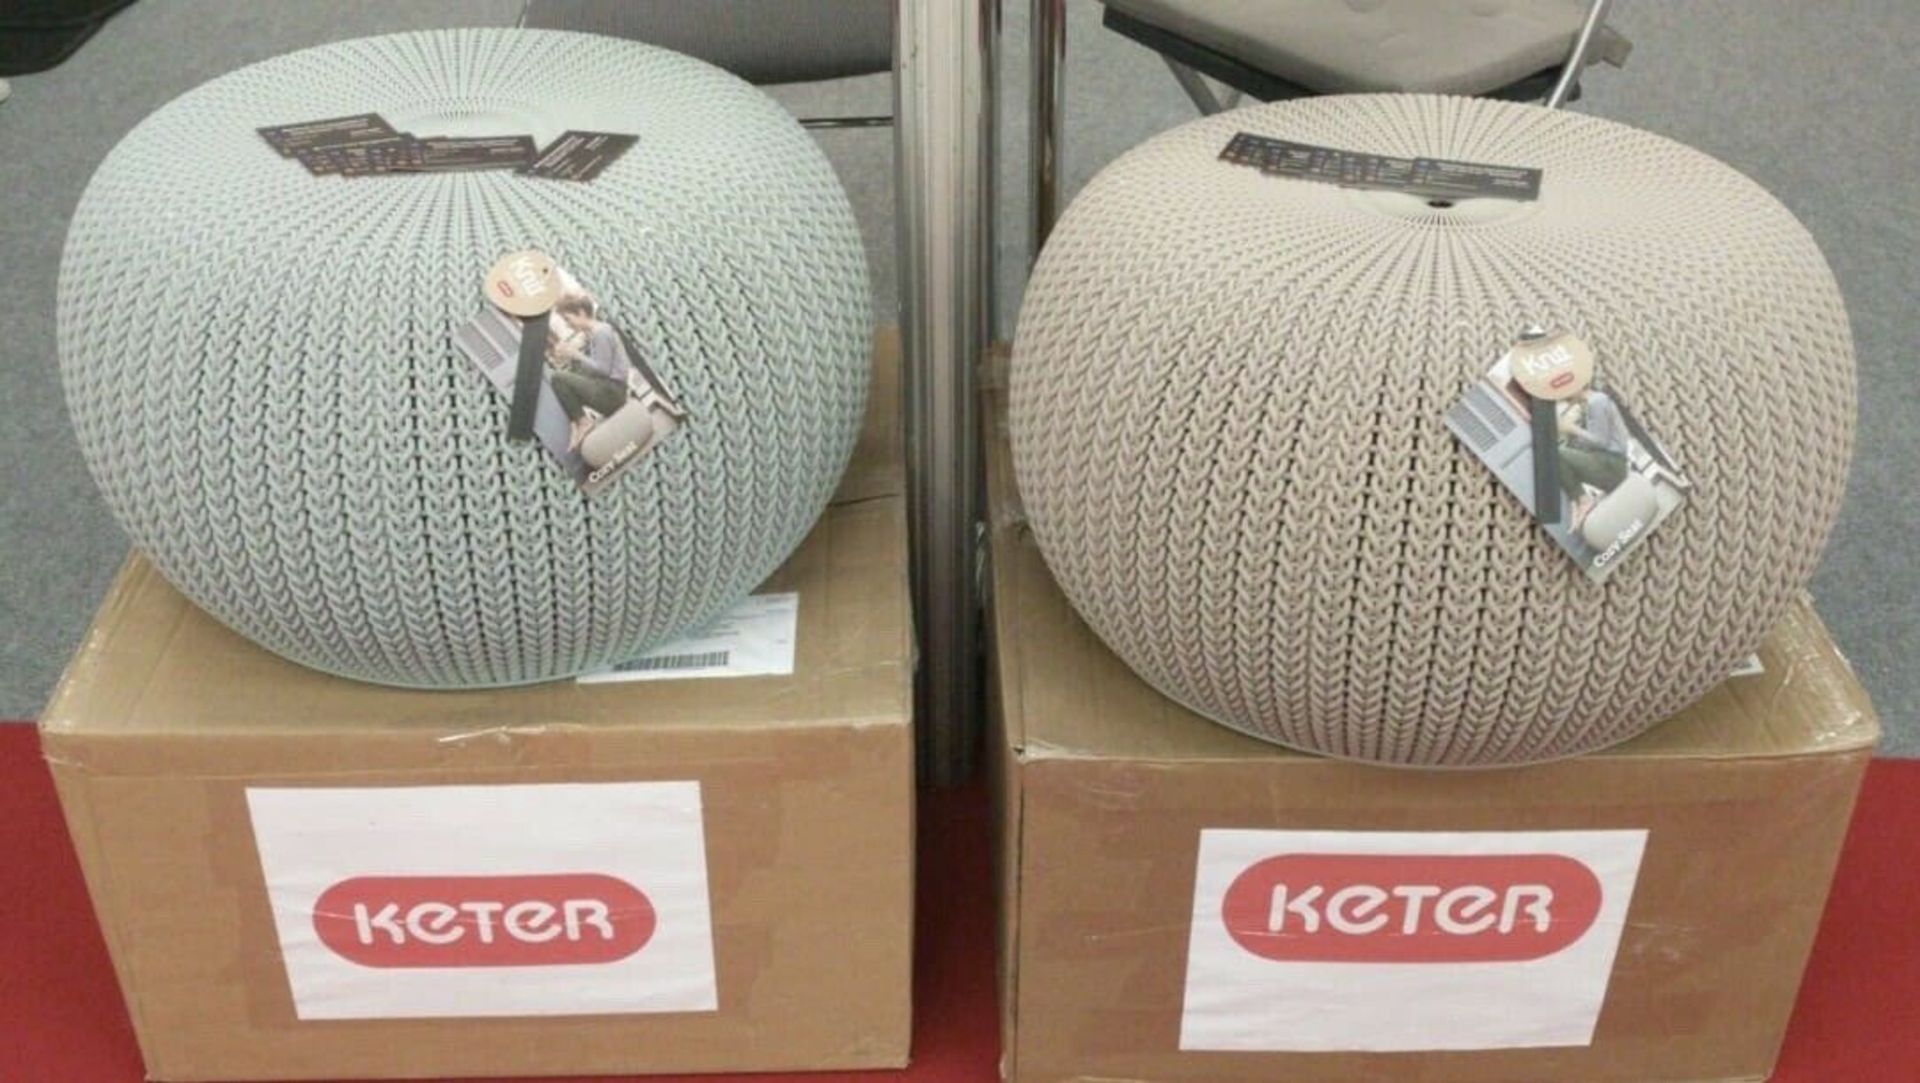 Brand new Keter Cozi Knit Seat in Beige - new in plain brown sealed carton - rrp uptp £49.99. 1pc in